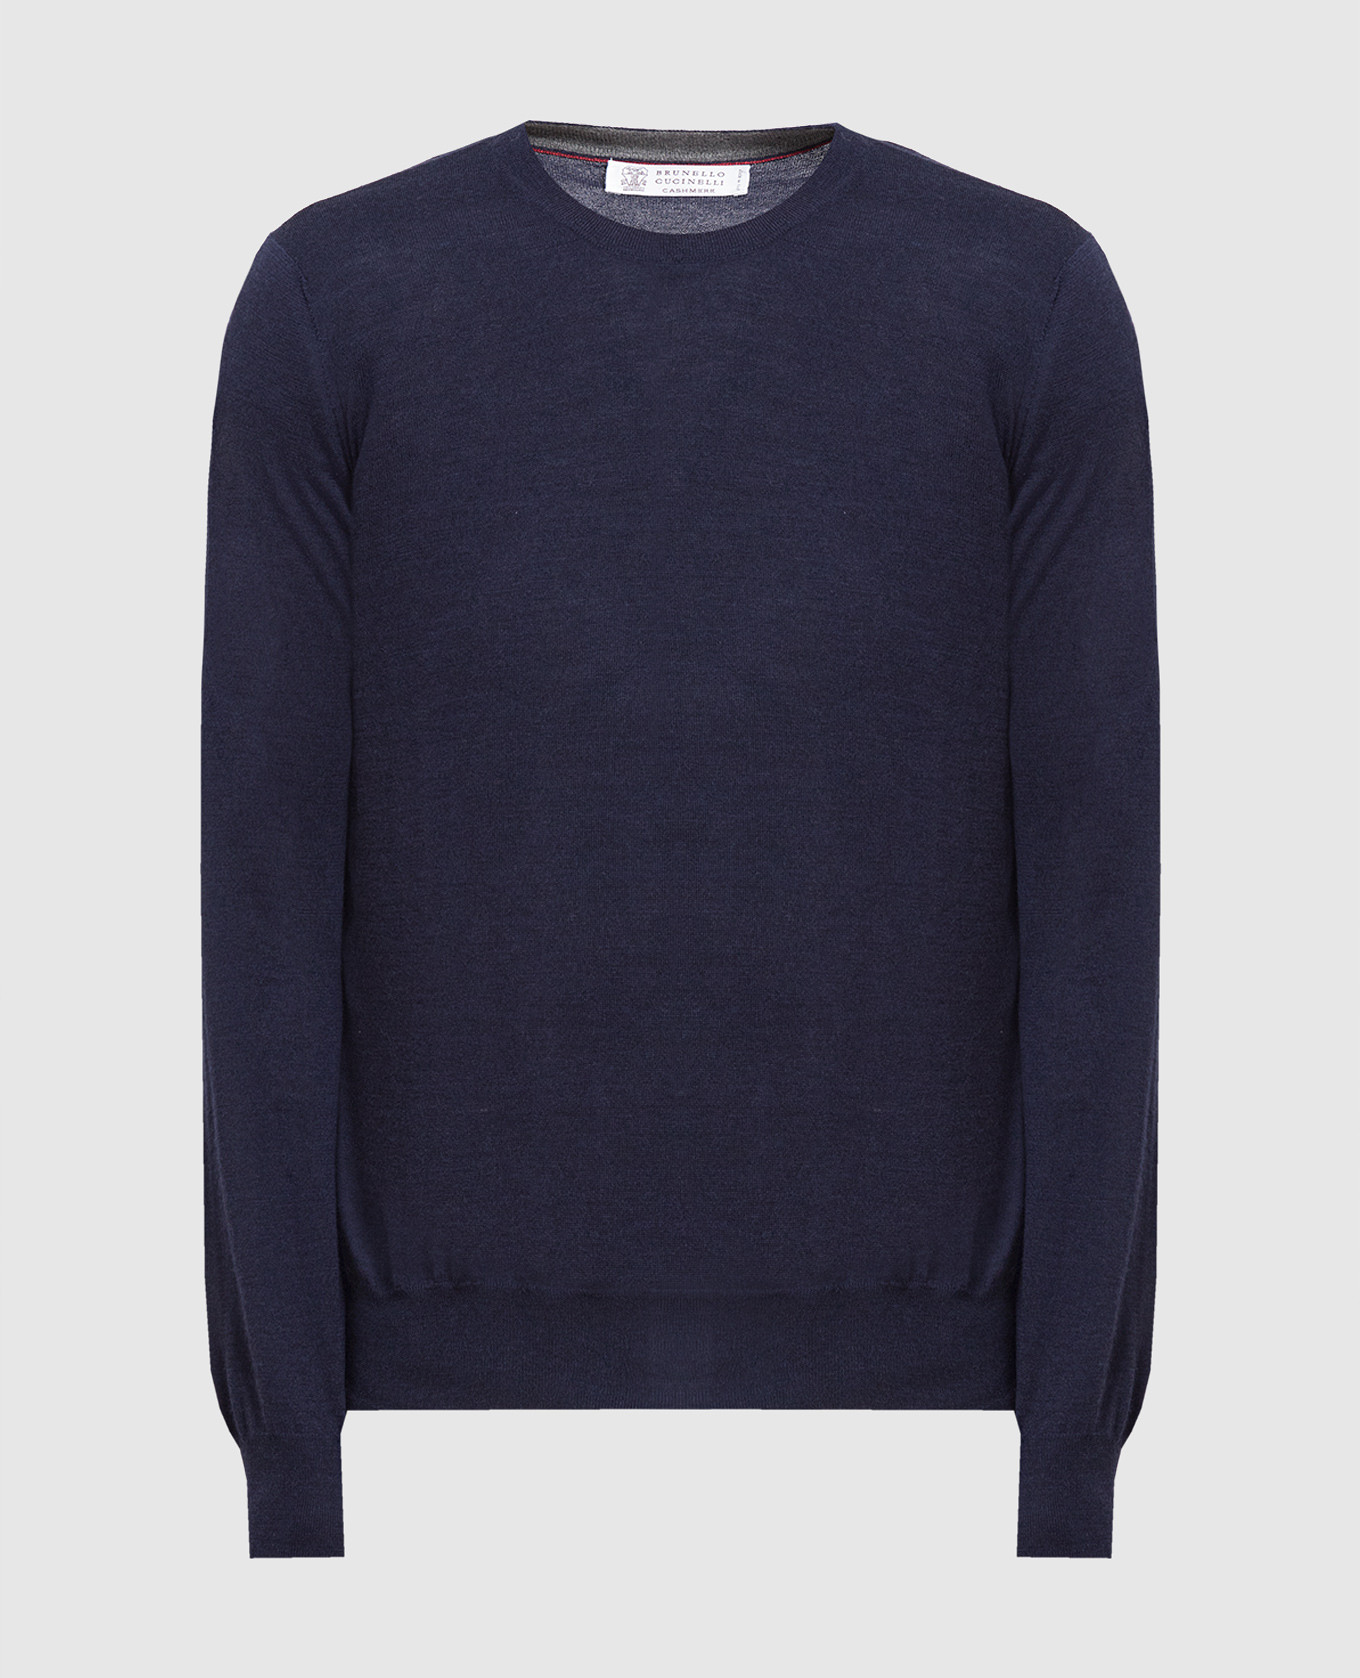 Navy blue wool and cashmere jumper